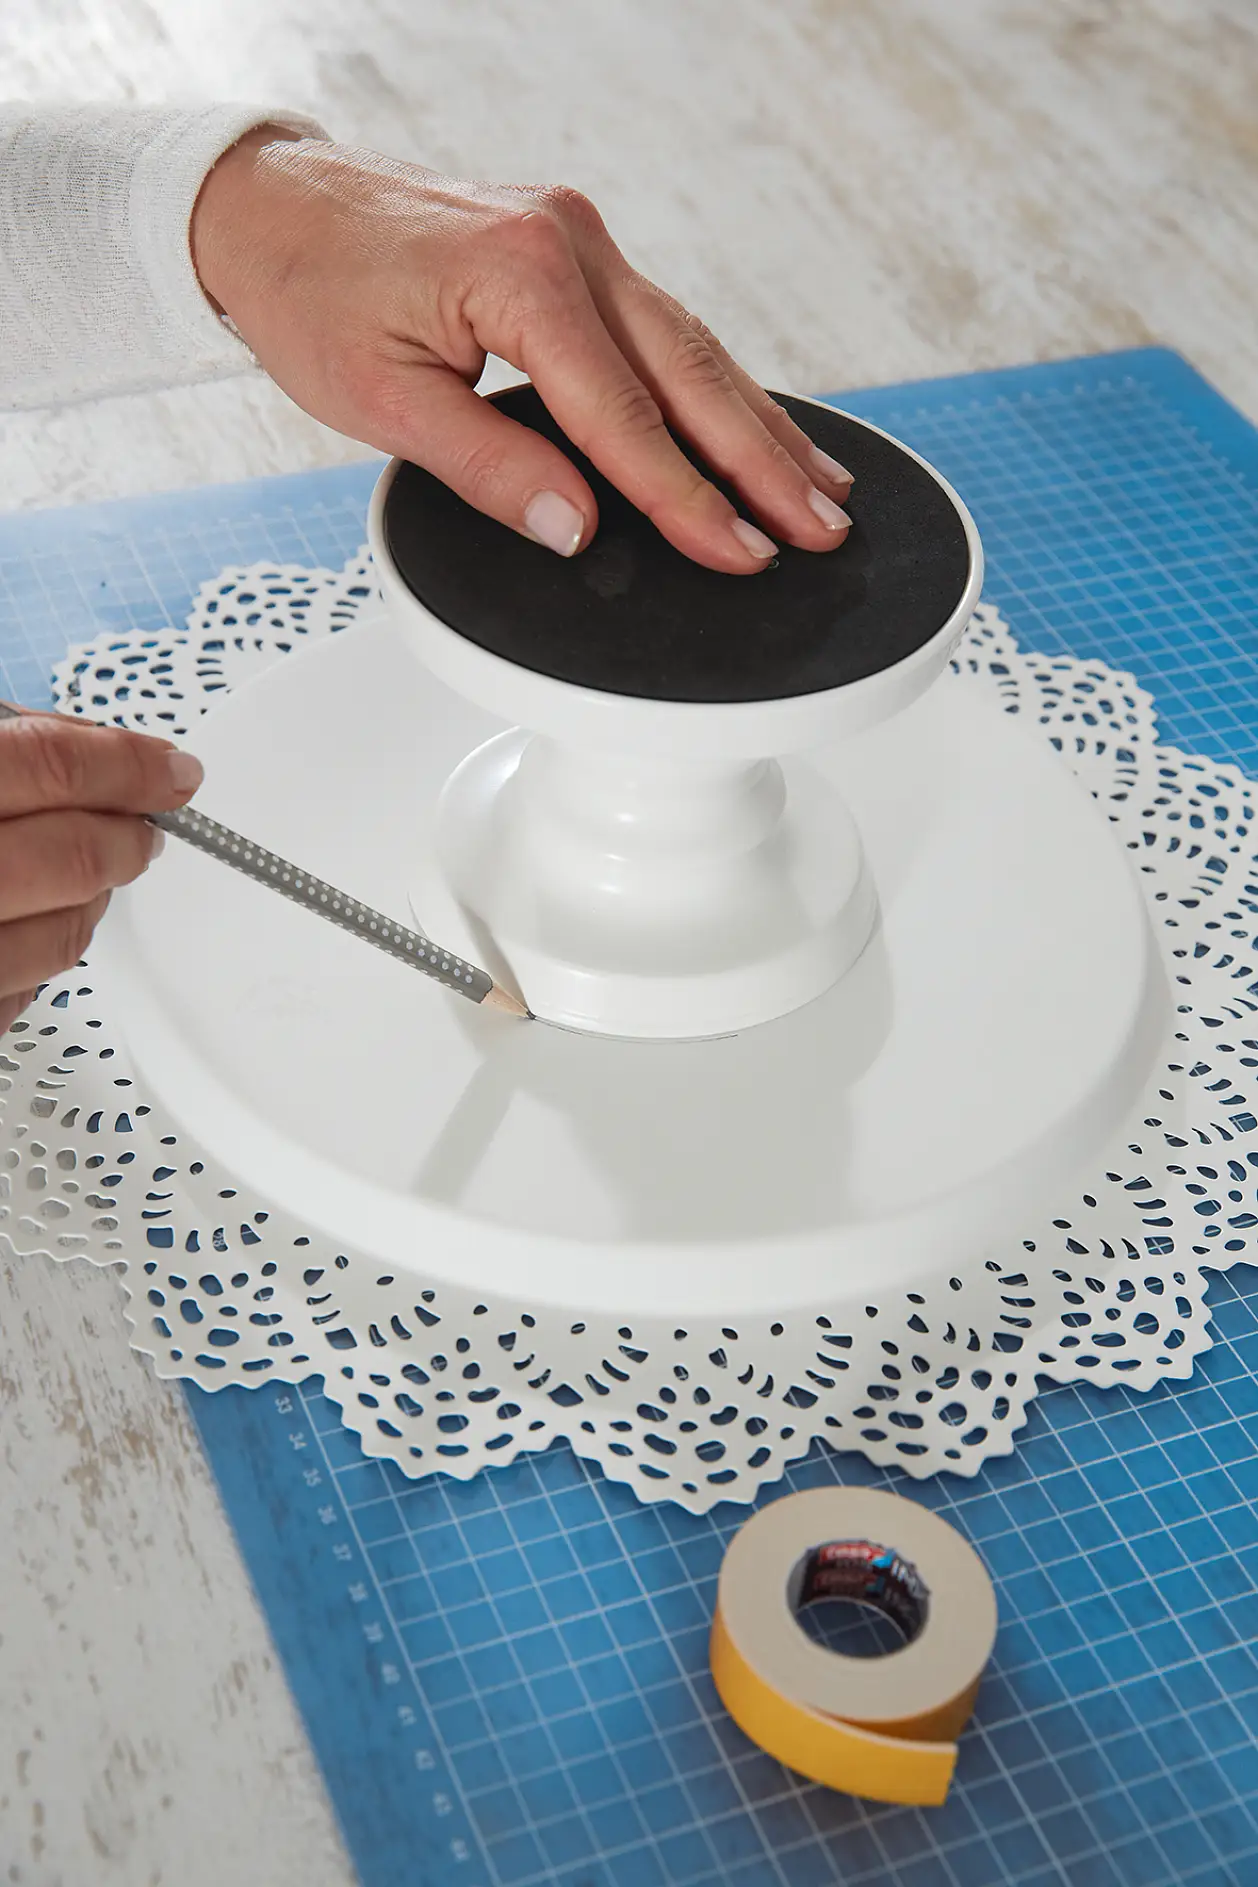 DIY Cake stand / Step 4: Placement